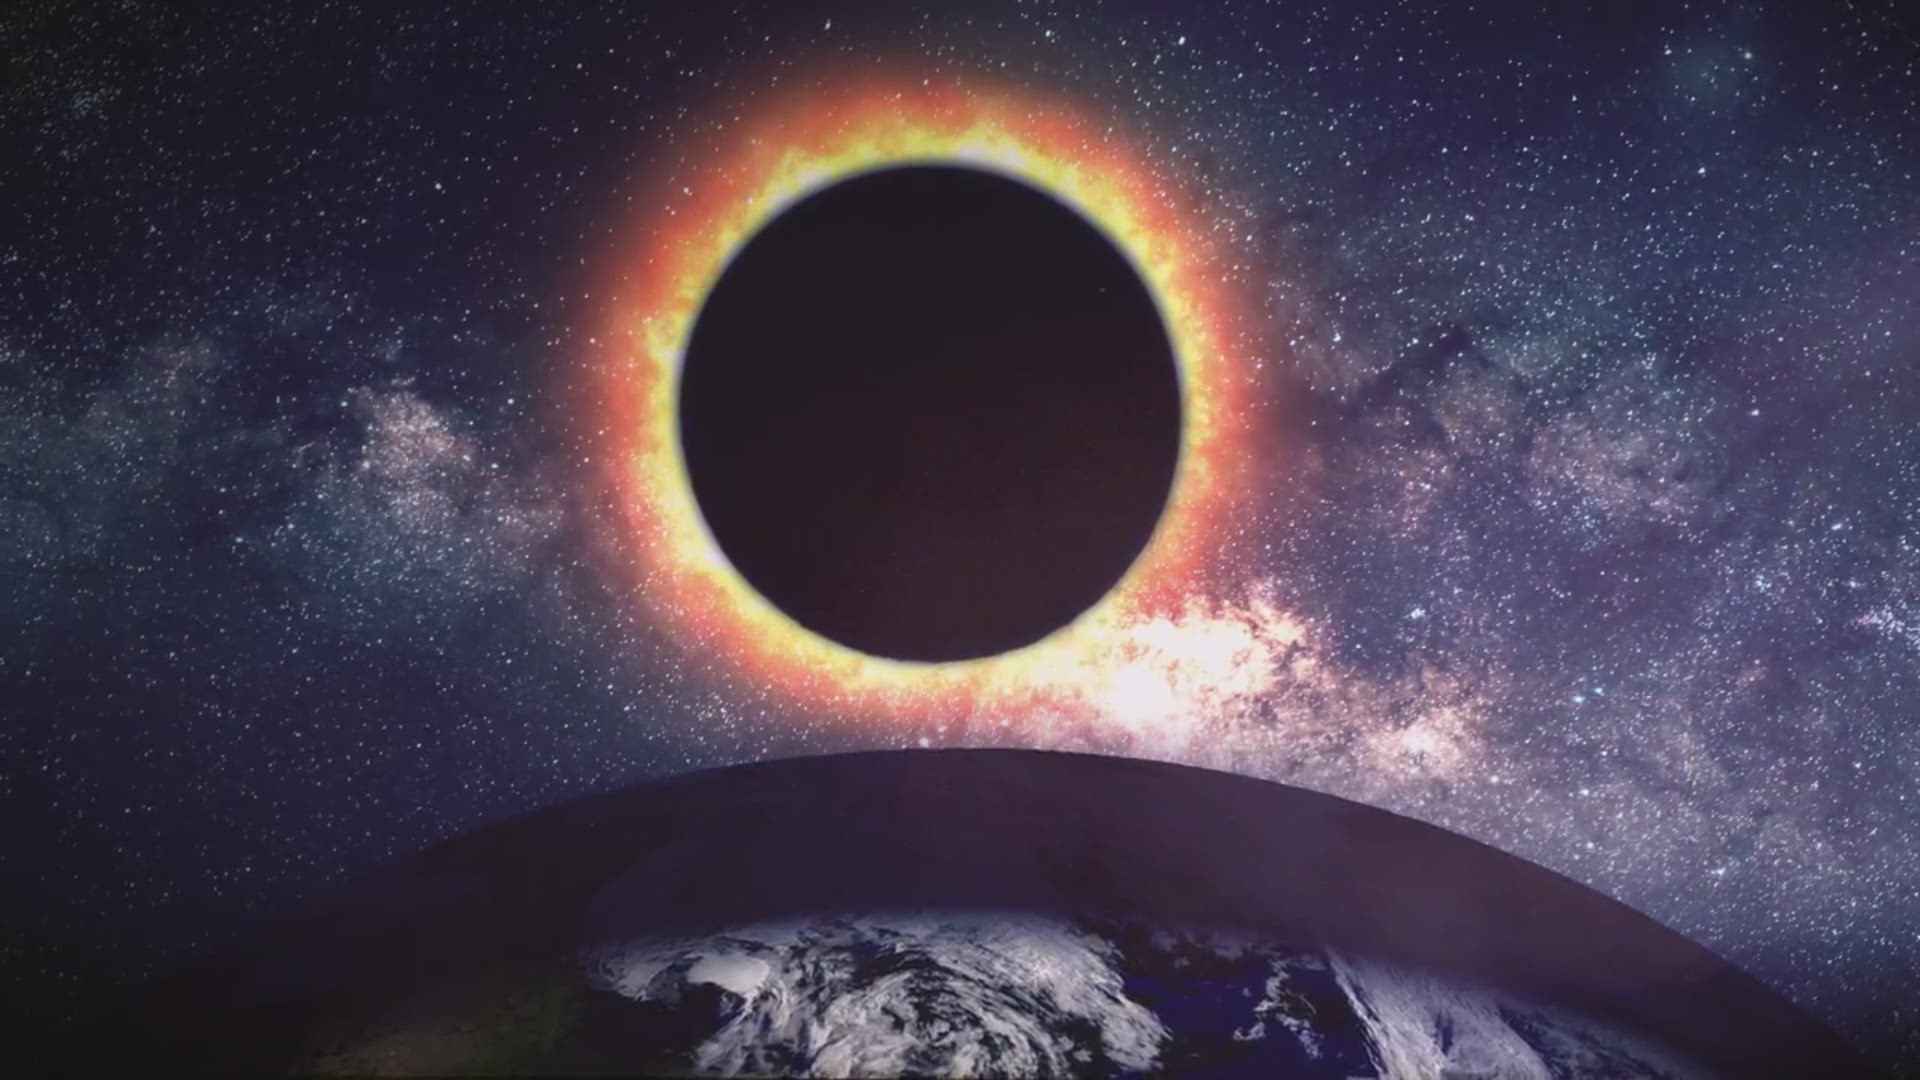 Experience the eclipse for yourself August 21st